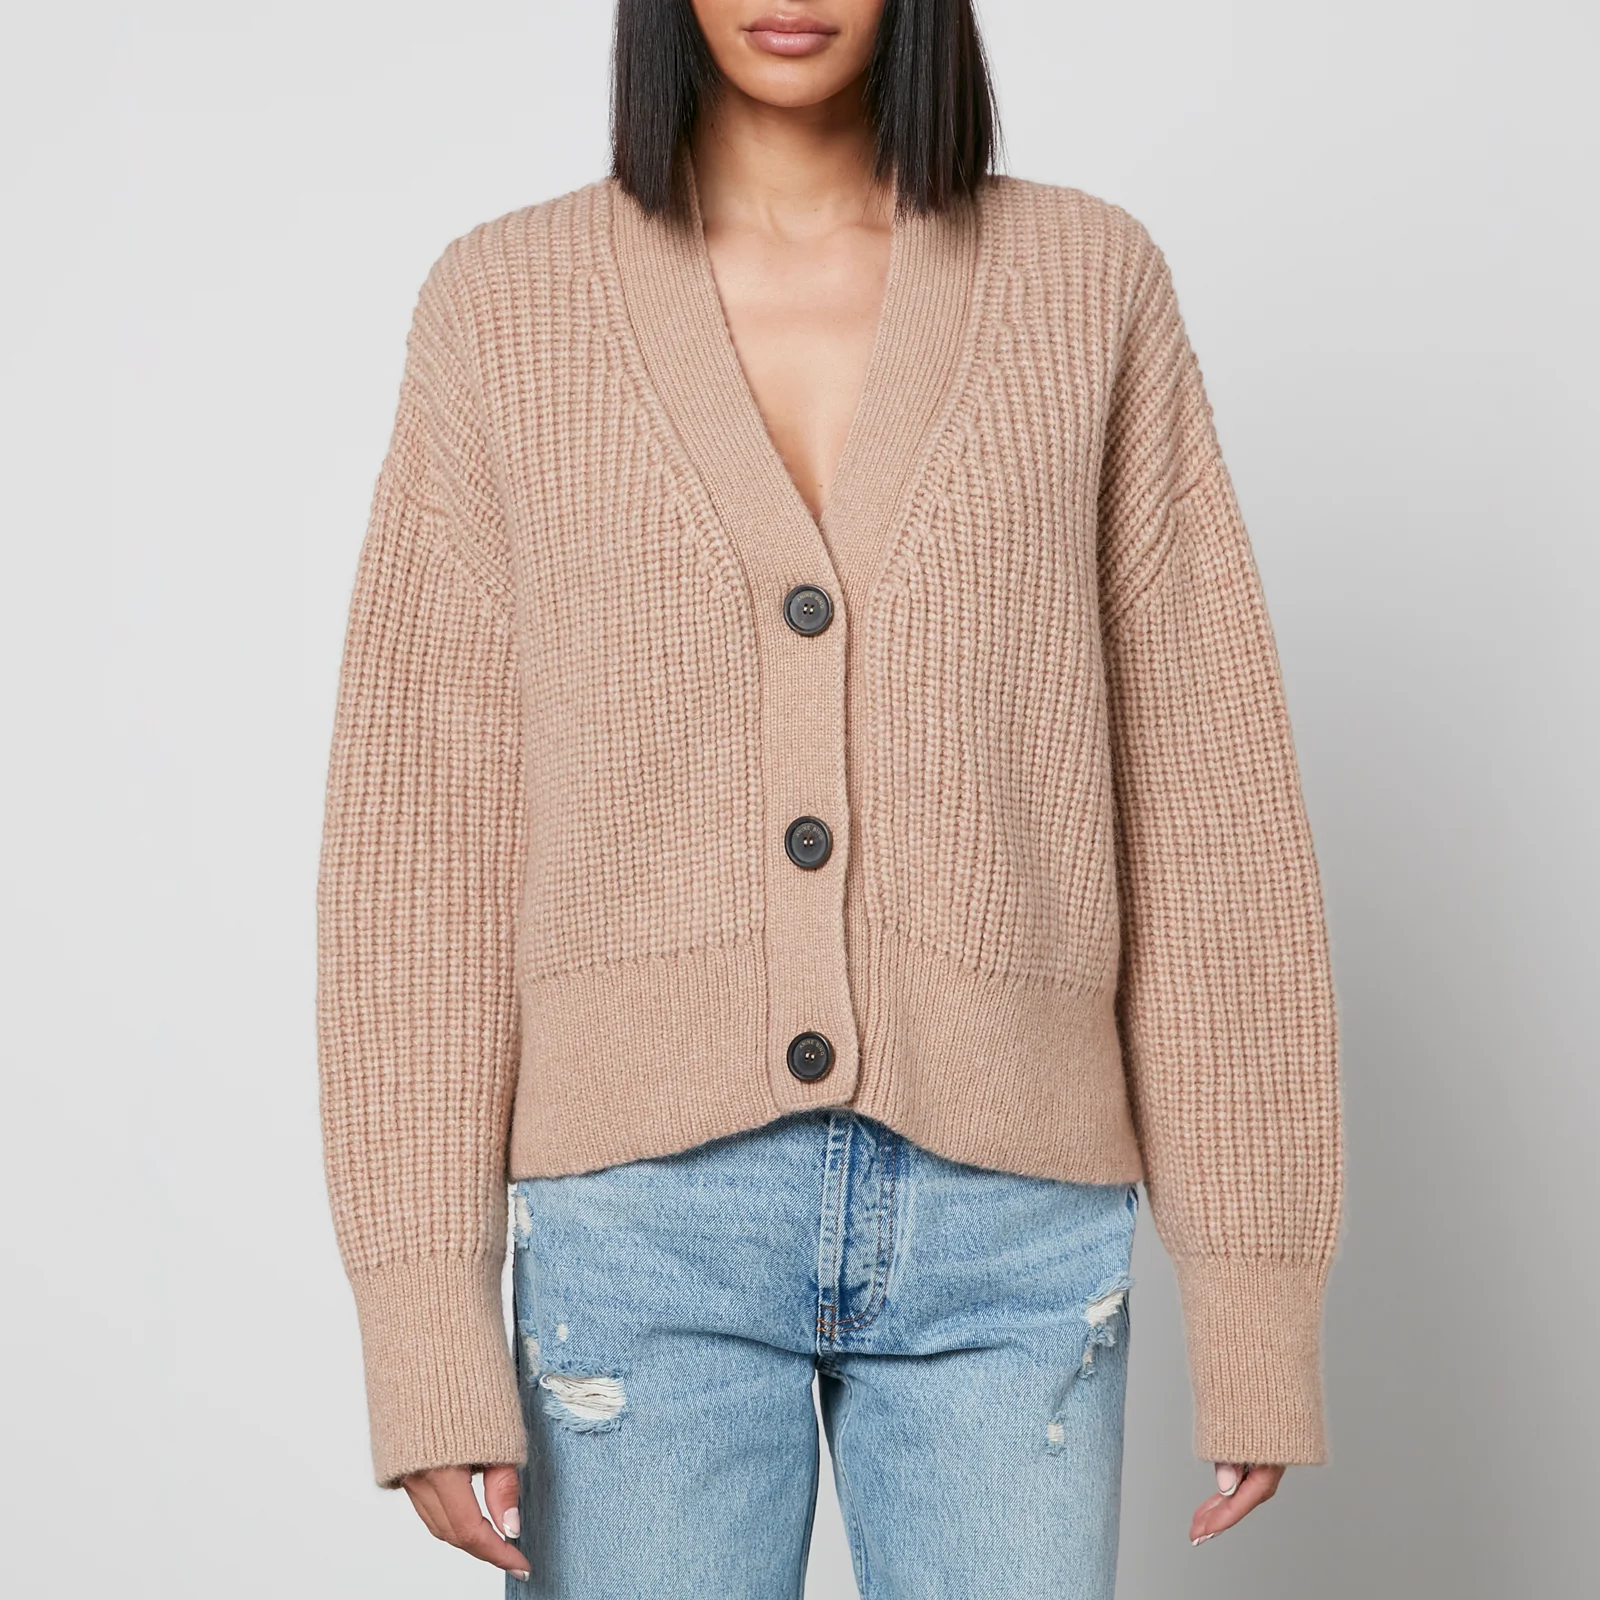 Anine Bing Maxwell Knitted Cardigan Image 1